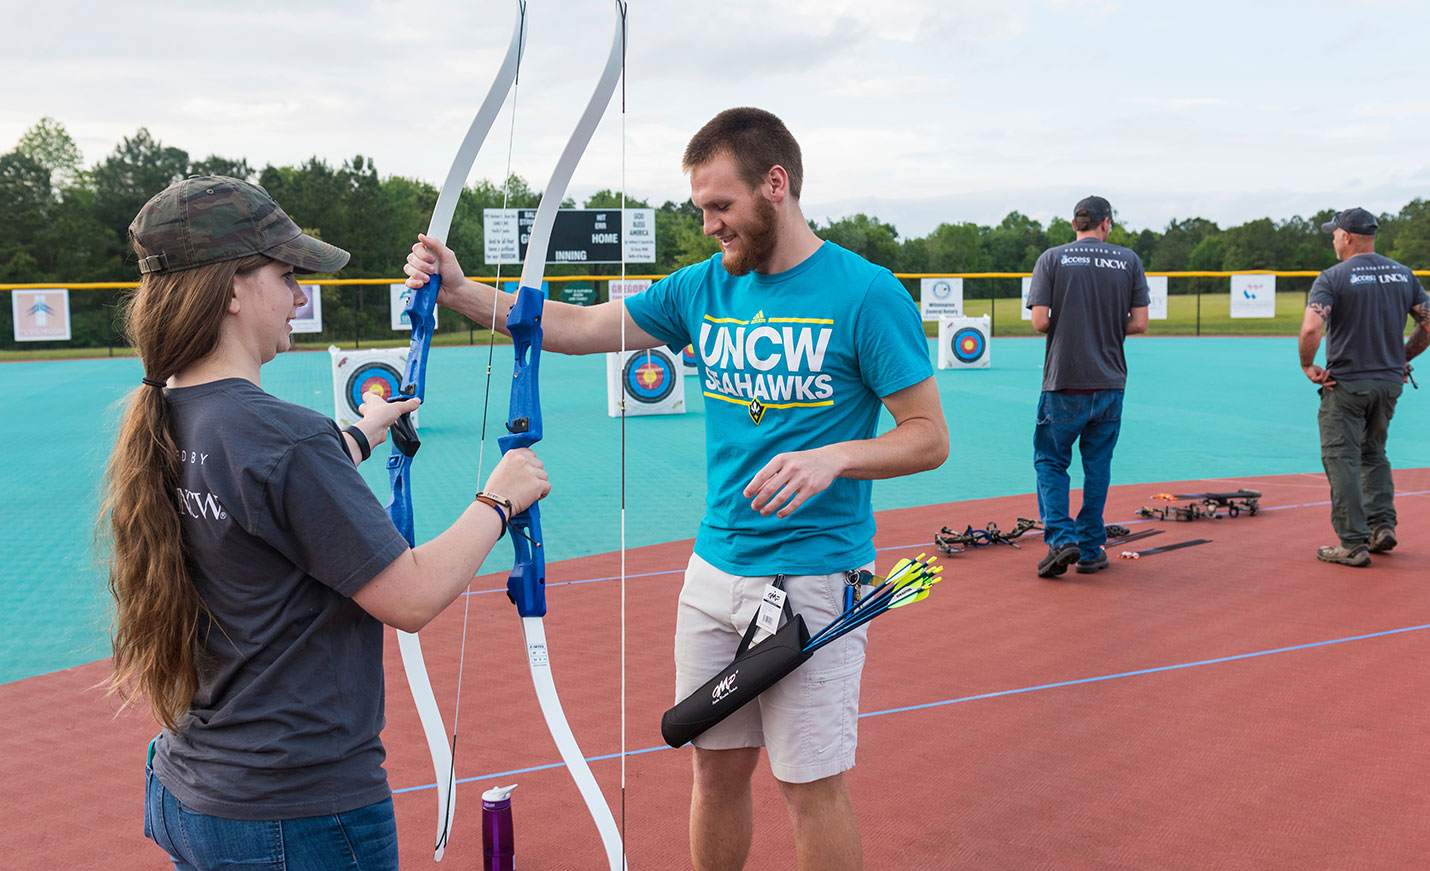 Students prepare two bows for an archery activity.